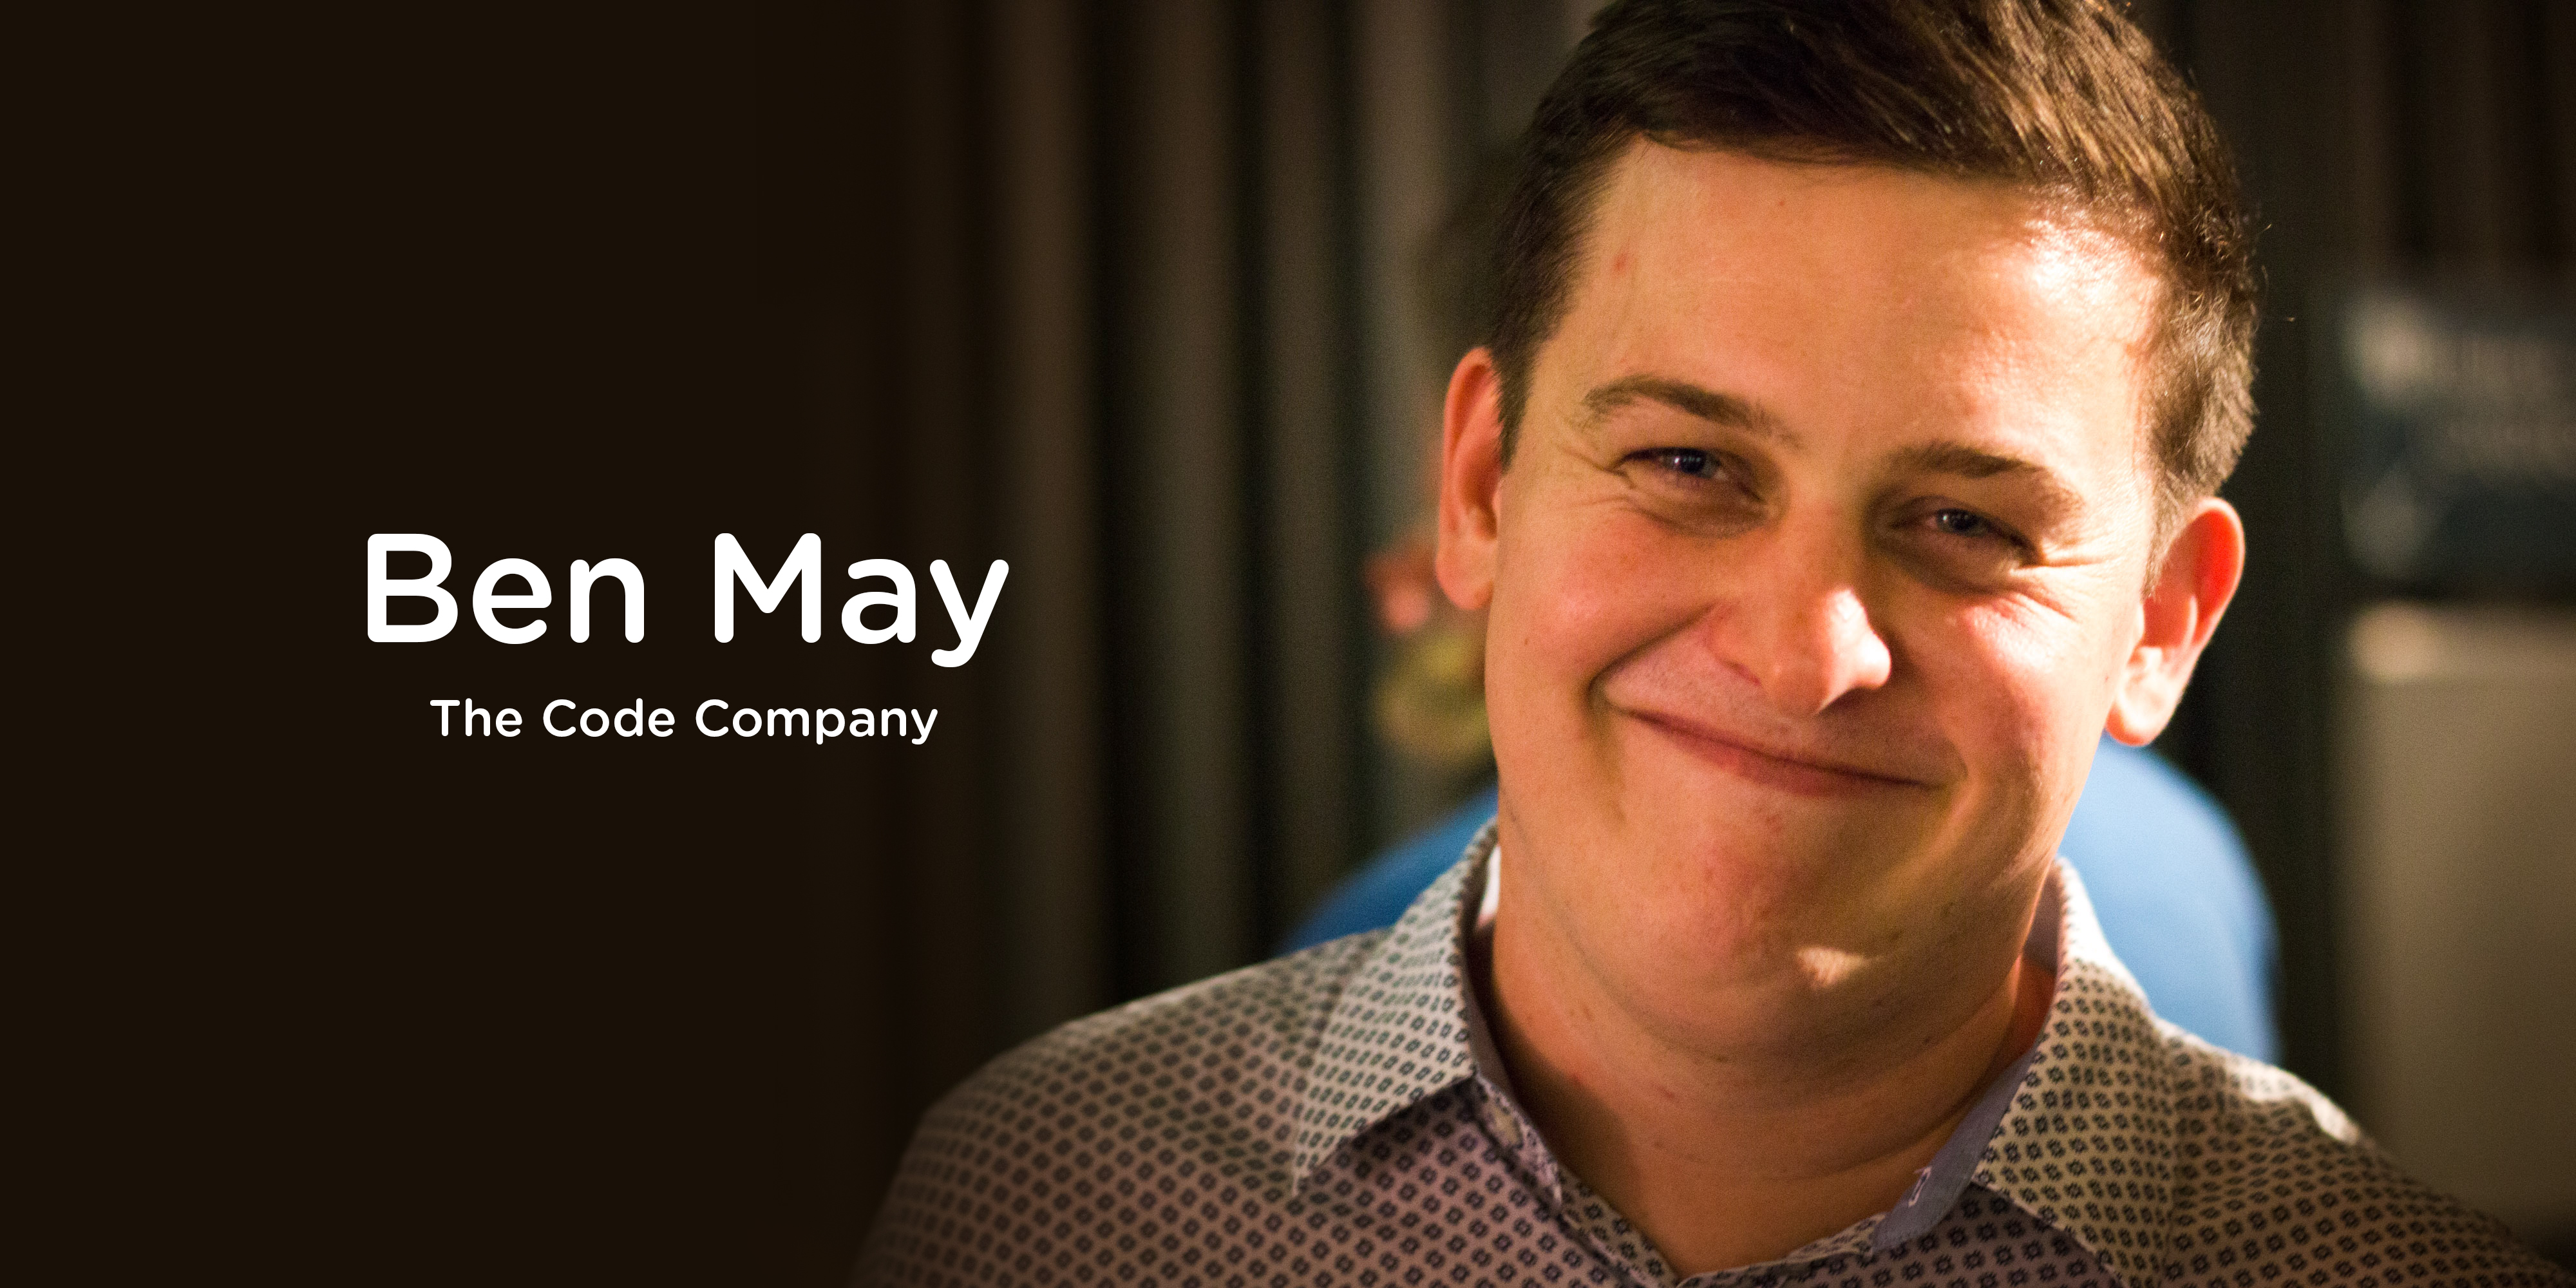 Running a successful regional agency, with Ben May